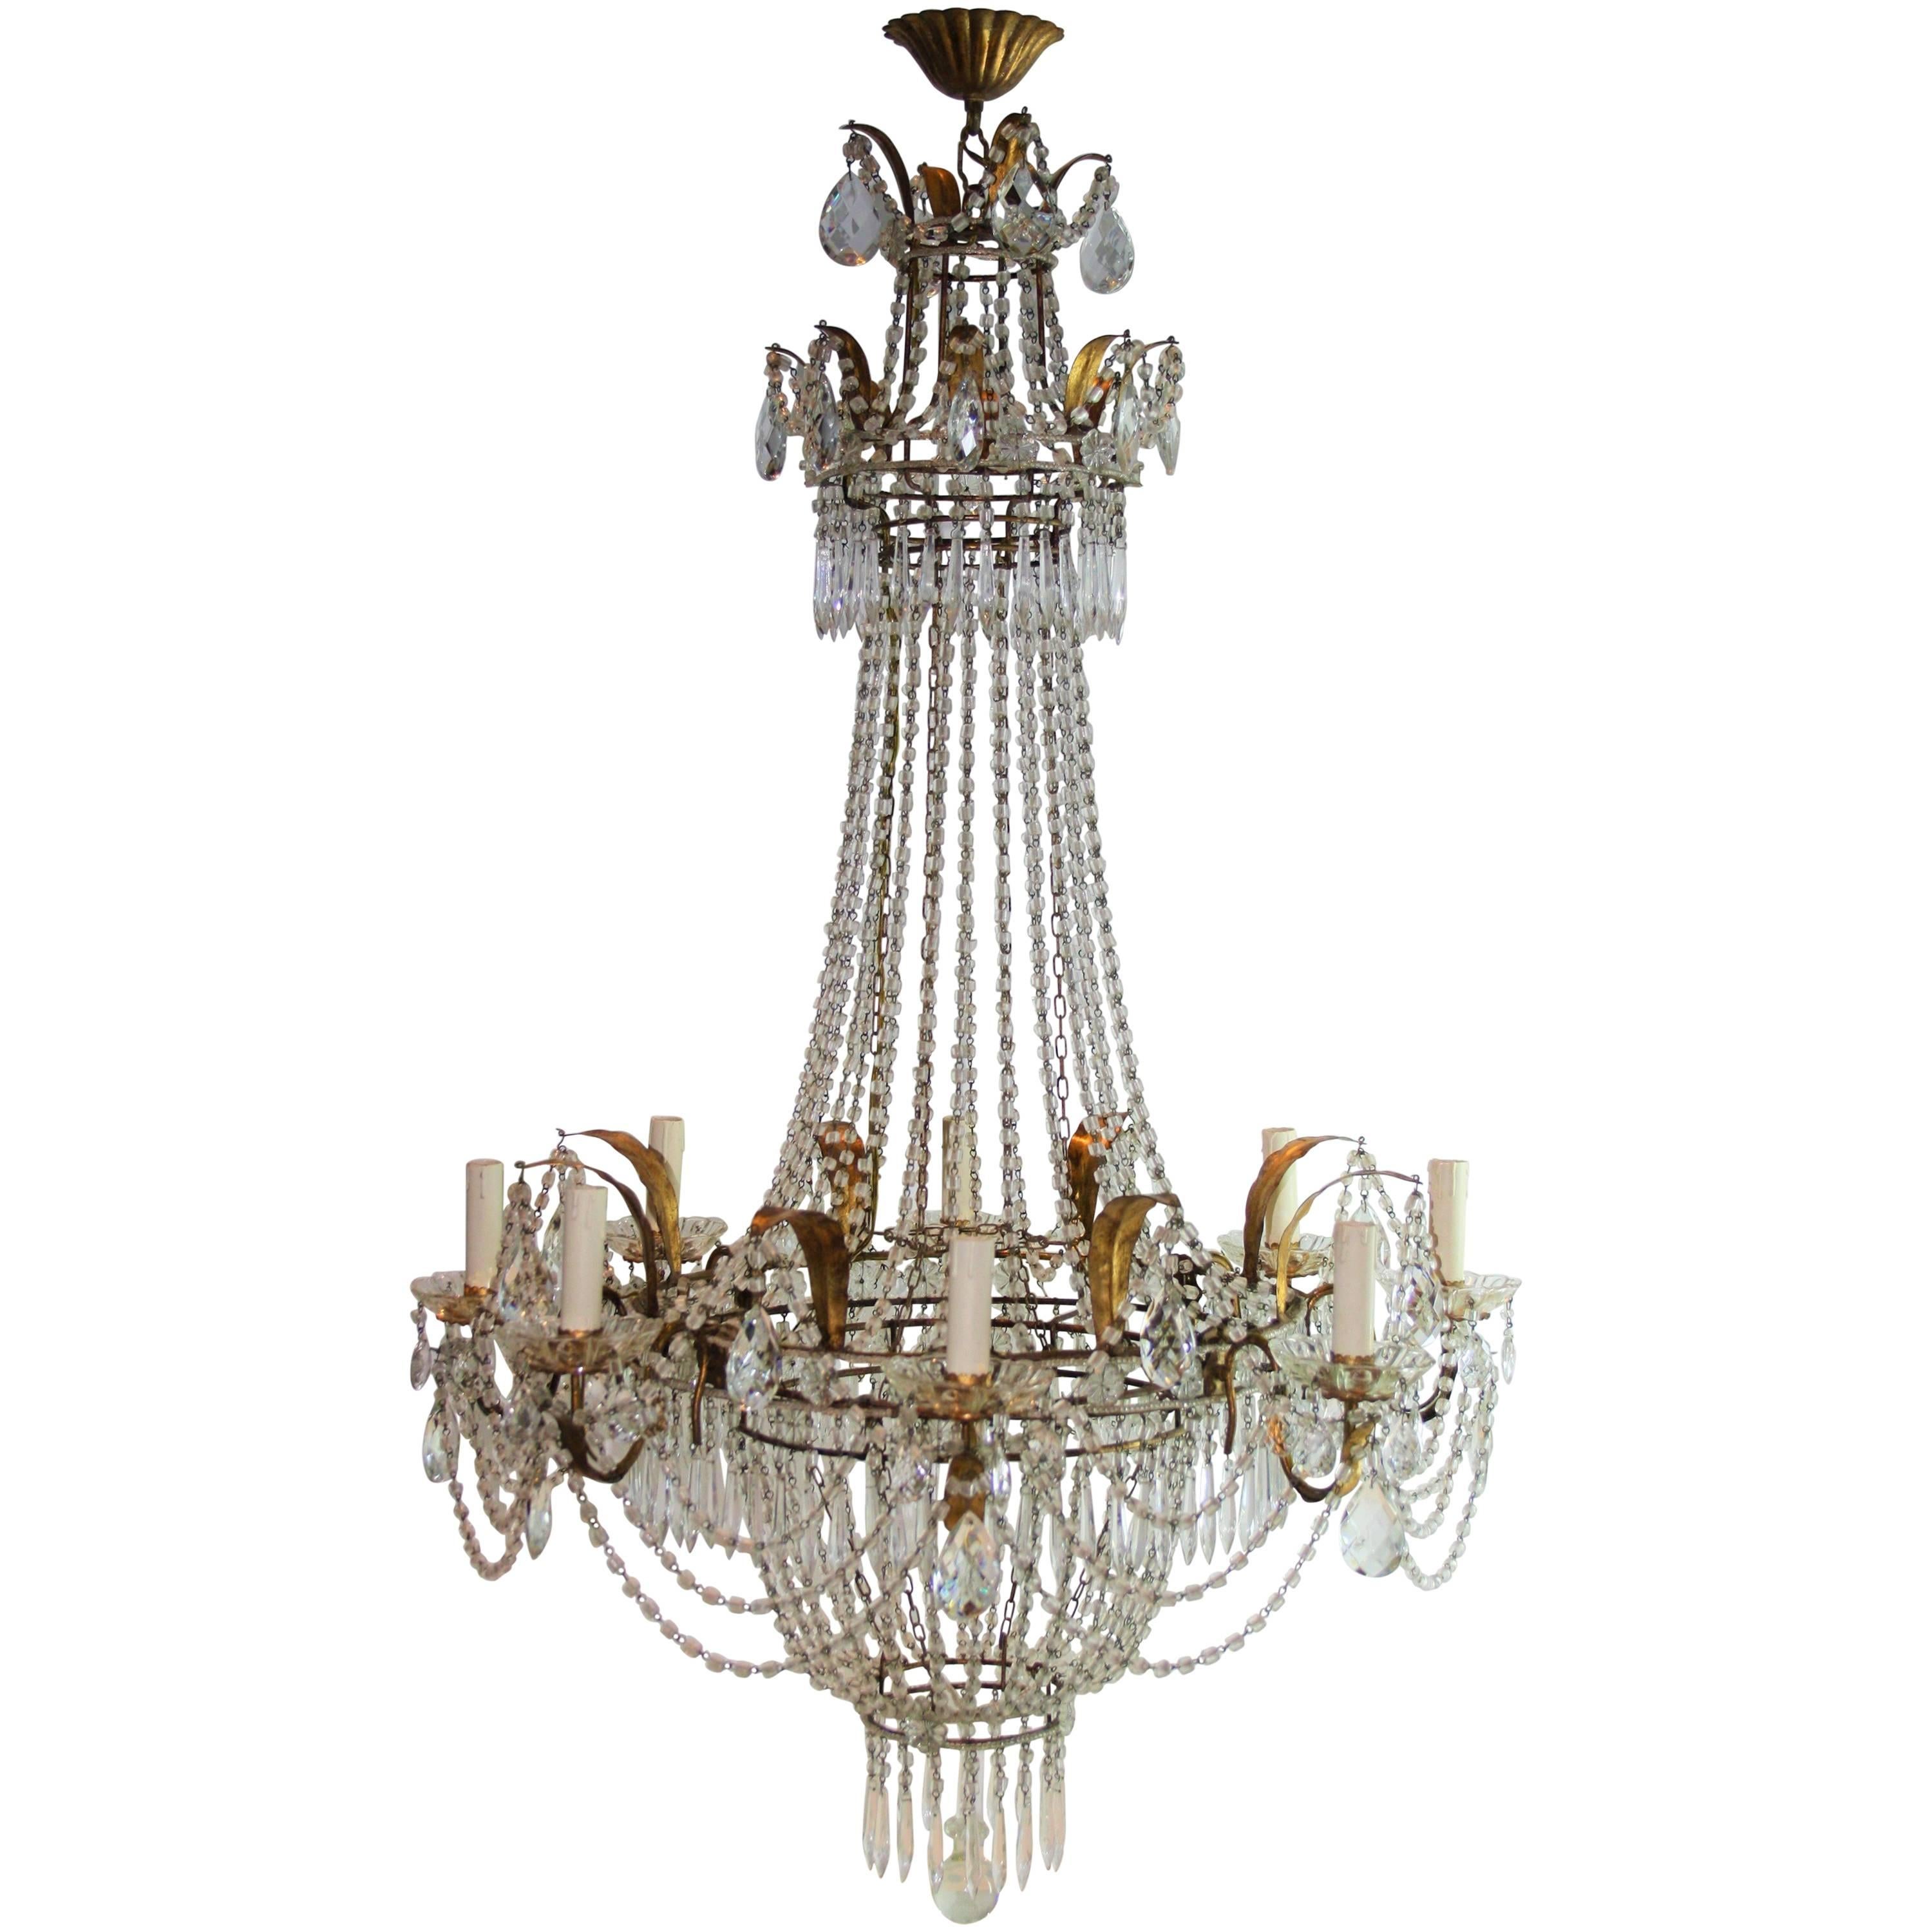 French Eight-Light Crystal Chandelier, 1930s